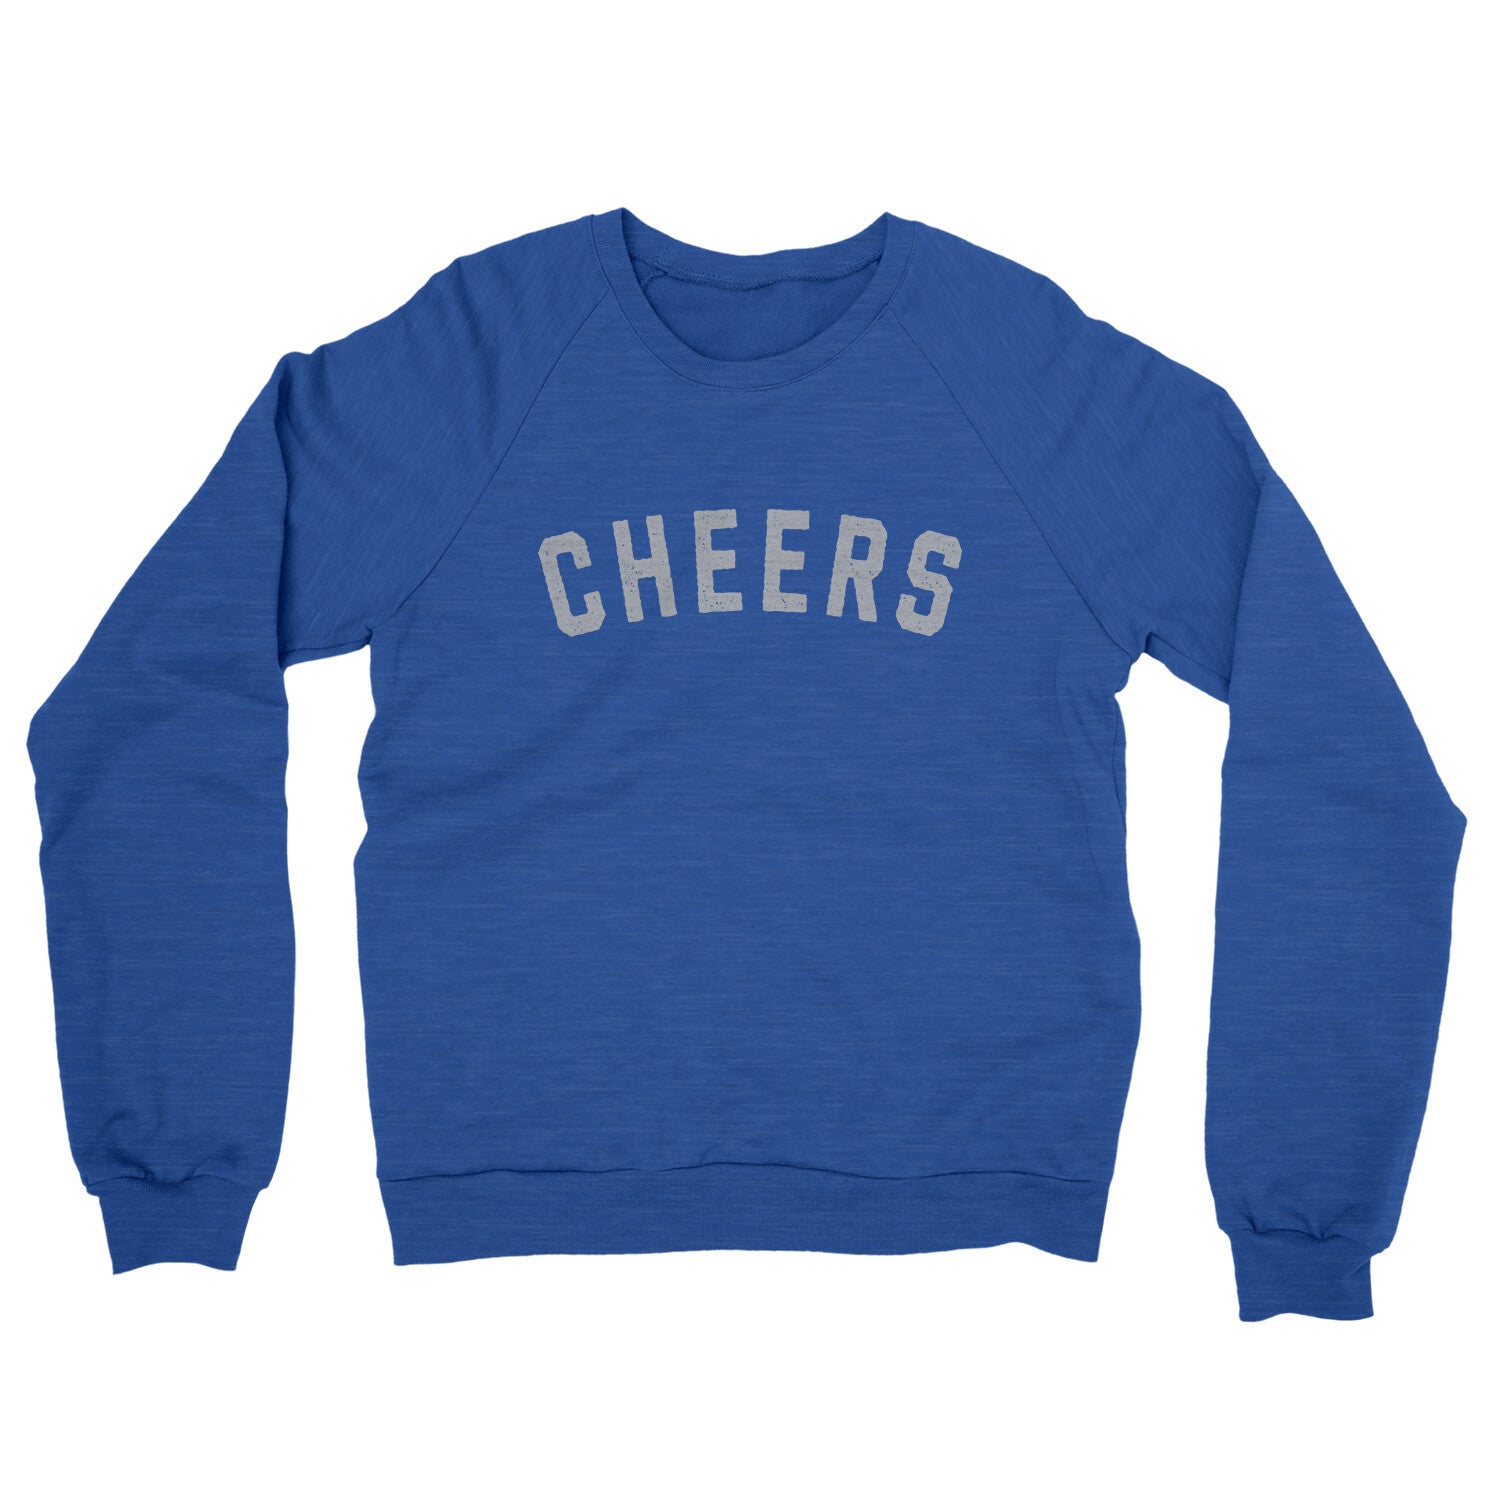 Cheers in Heather Royal Color